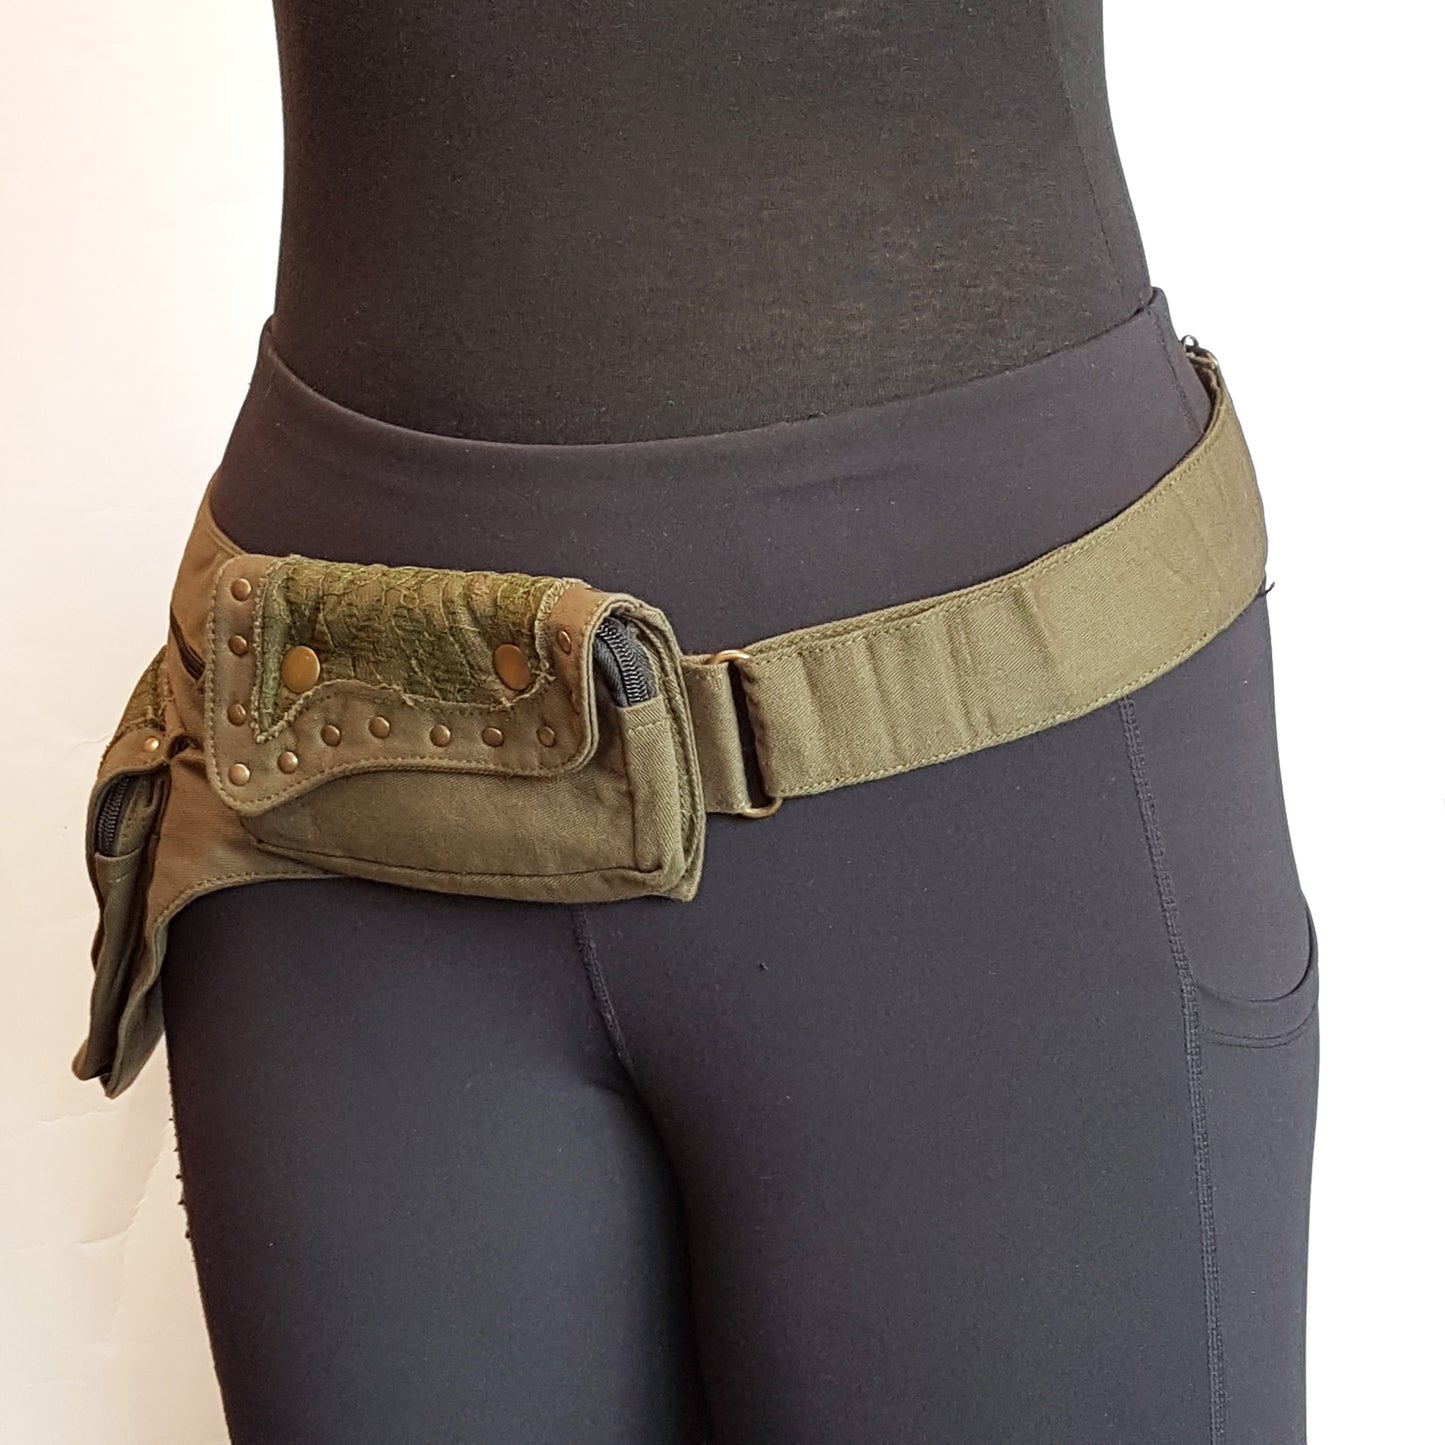 Utility hip belt 5 pocket in army green. Adjusts to 48 inch waist/ hip.